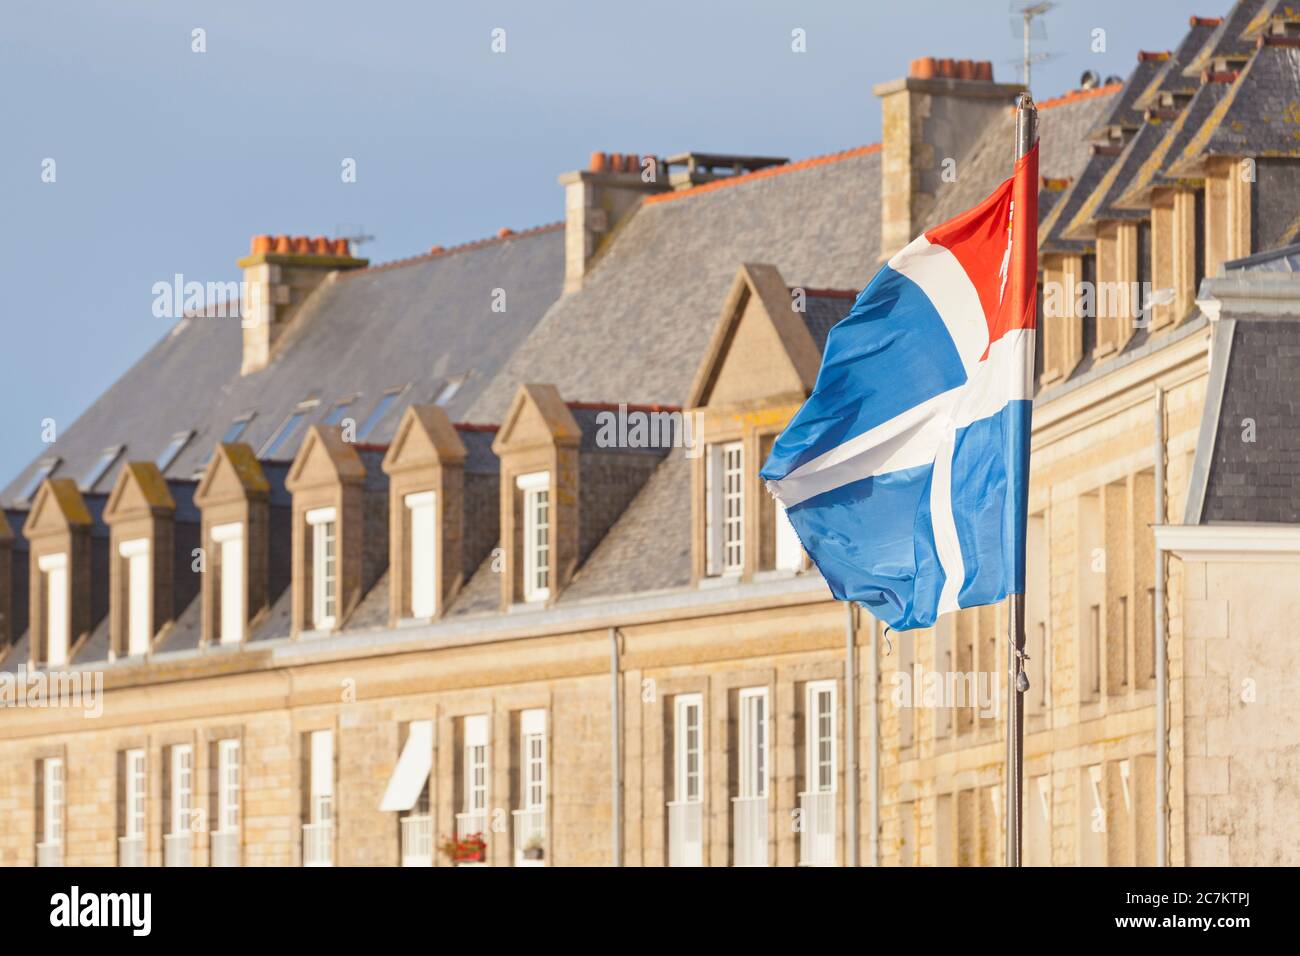 Saint Malo Flag with houses in the background, Cote Armor, Brittany, City, France, Europe Stock Photo